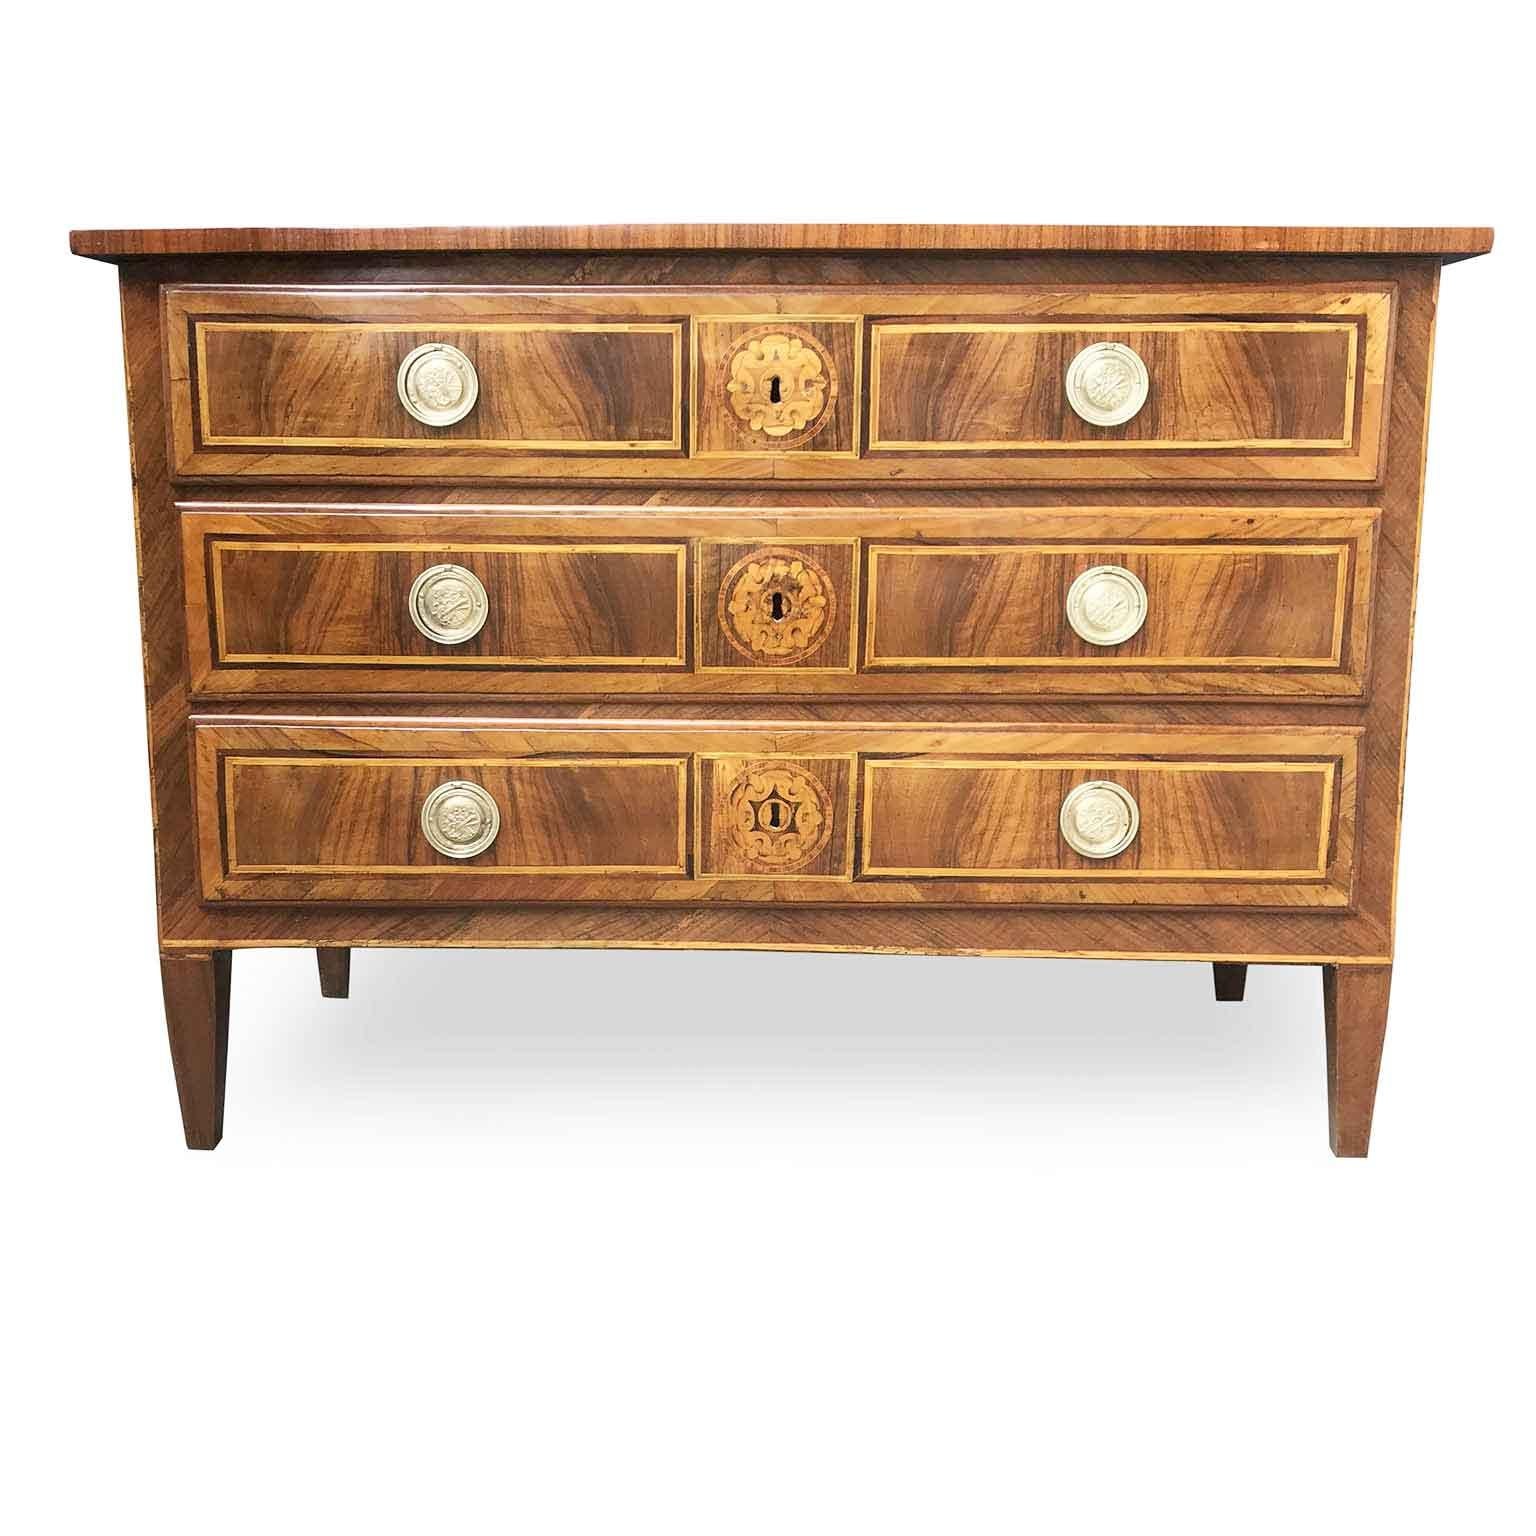 Fruitwood Early 19th Century Italian Directoire Chest of Drawers with Rose Marquetry